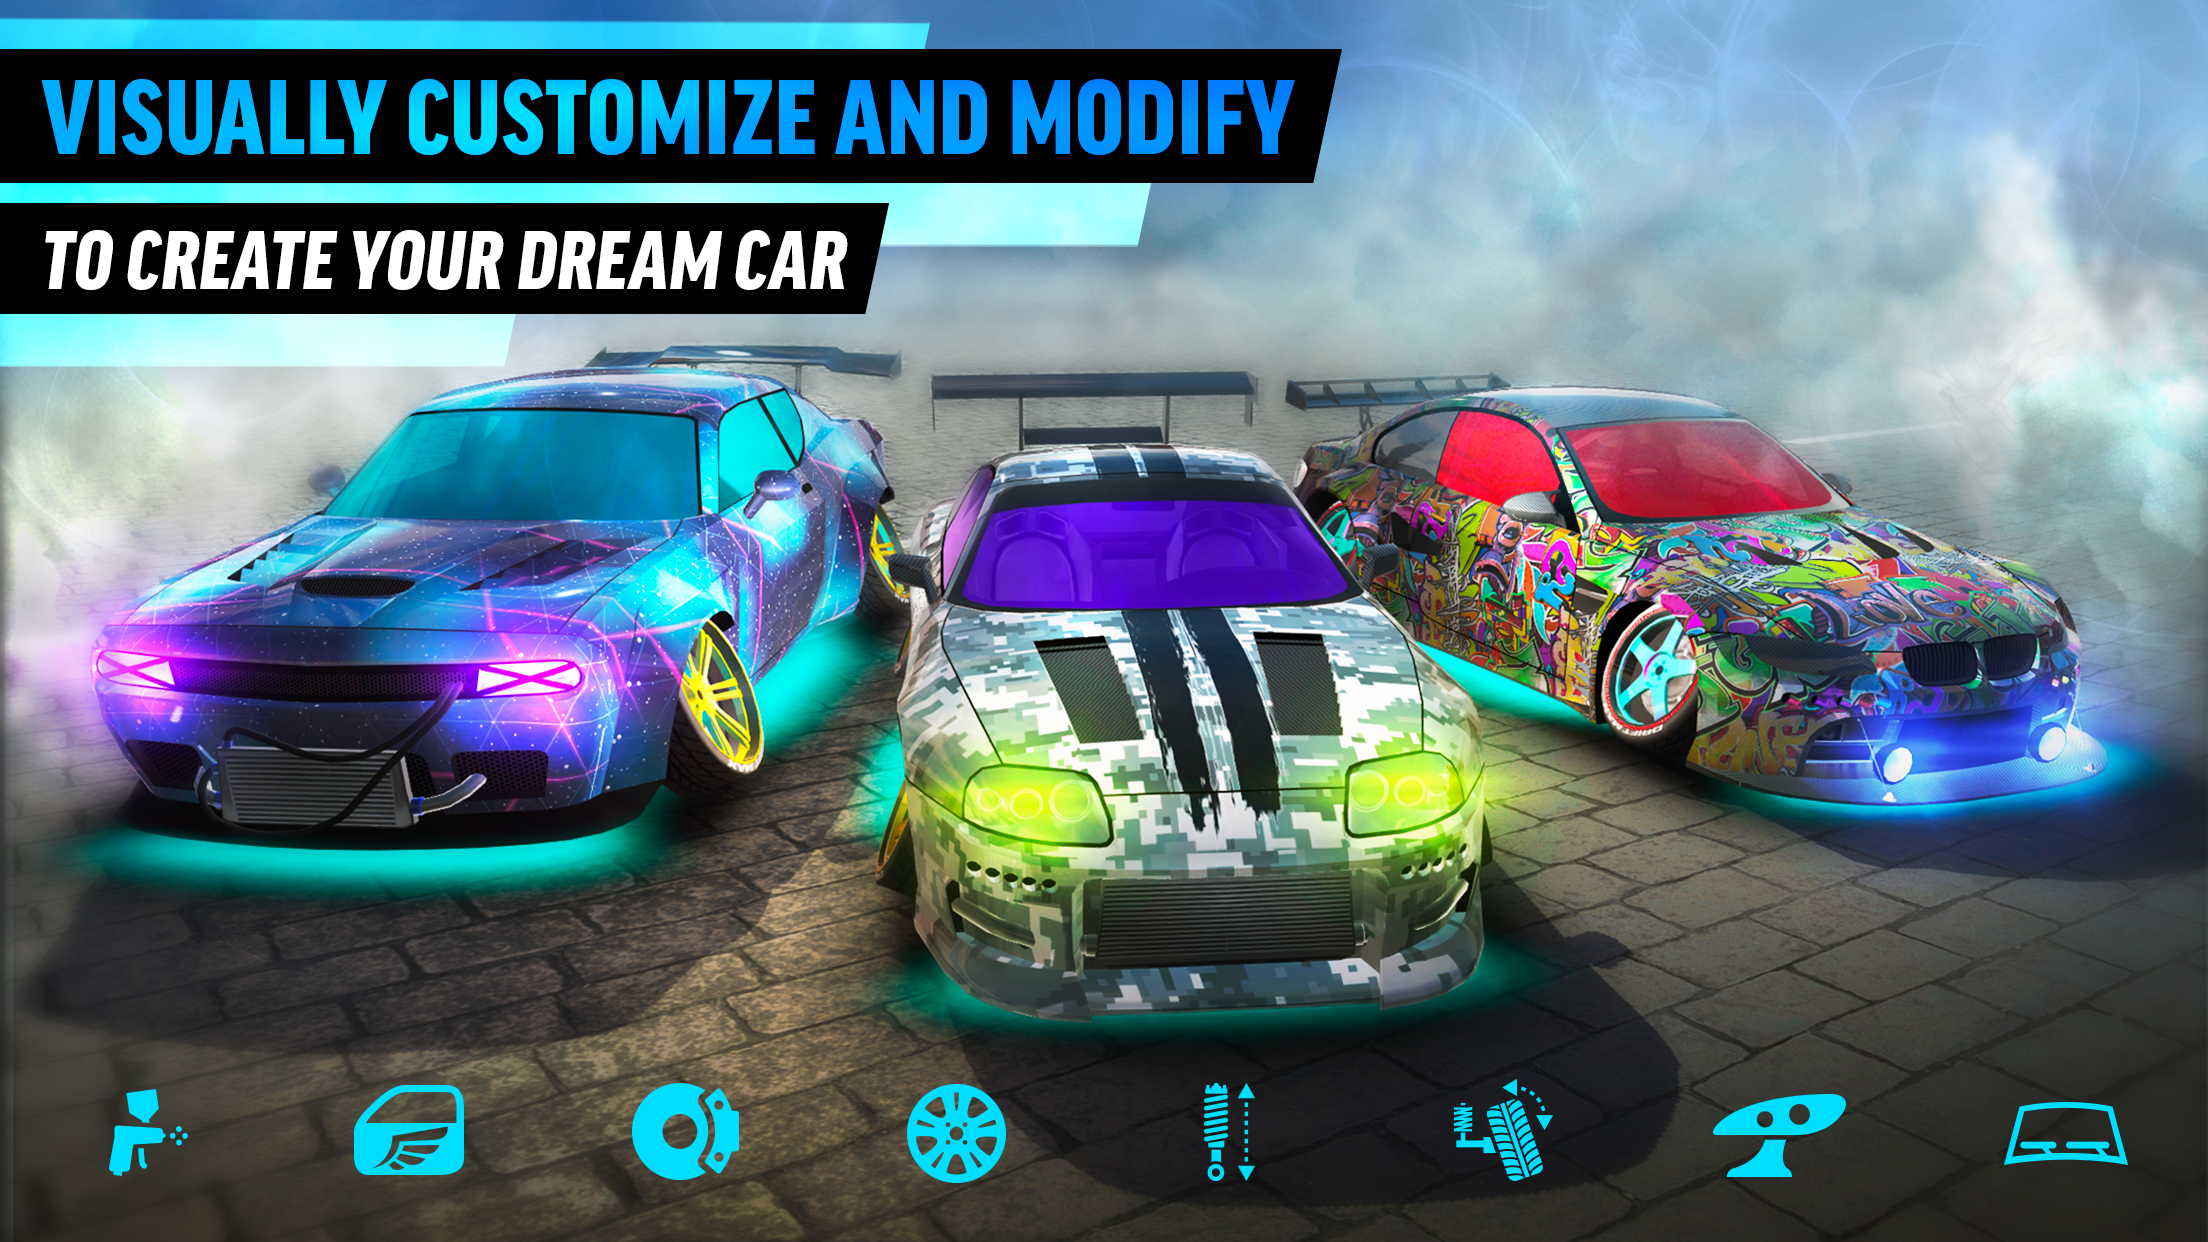 Drift Max Pro Car Racing Game Mod apk [Unlimited money] download